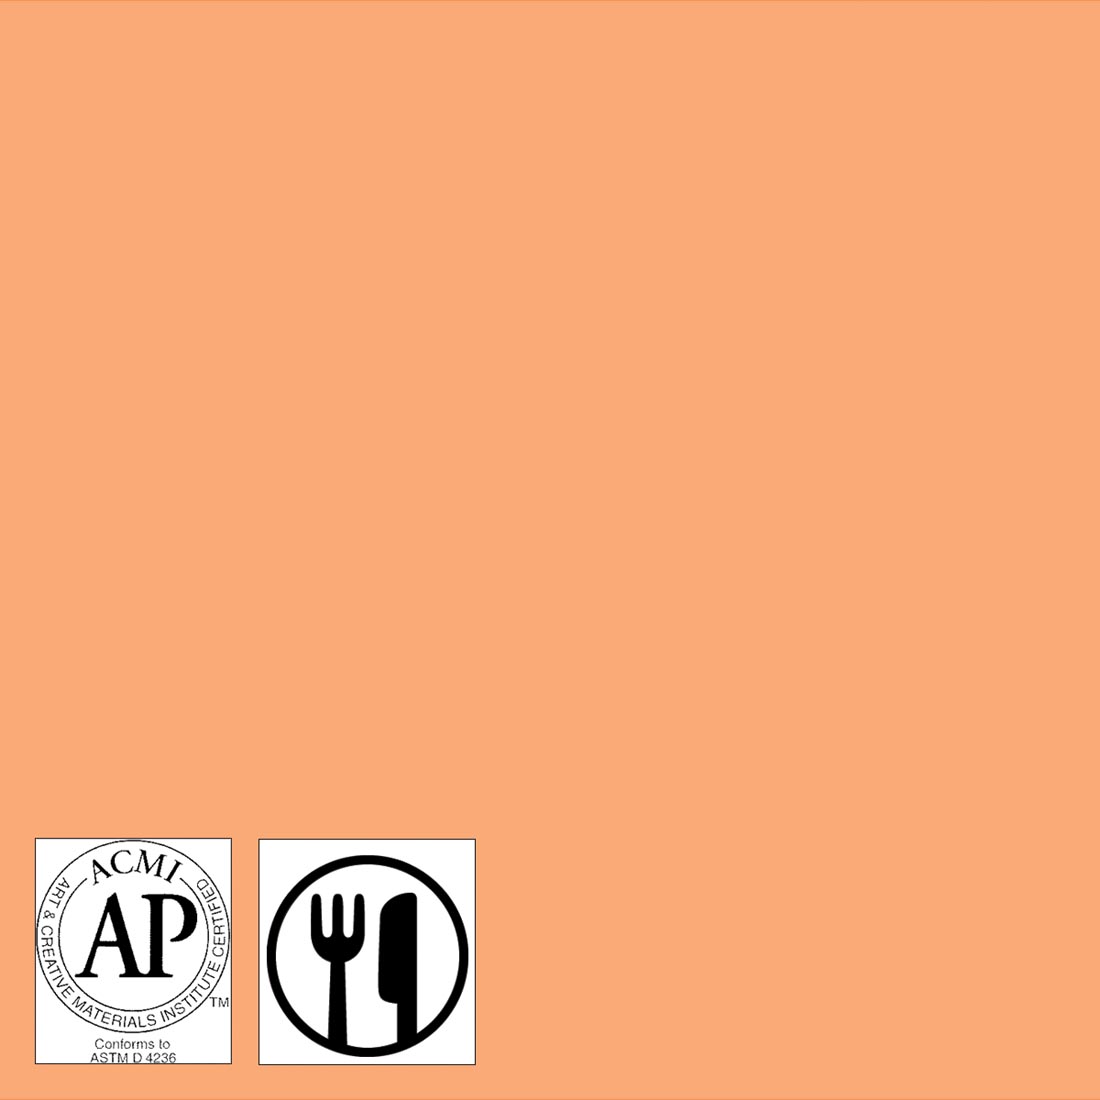 Color swatch of Mayco Stroke & Coat Wonderglaze Just Peachy with the symbols for AP Seal and food safe